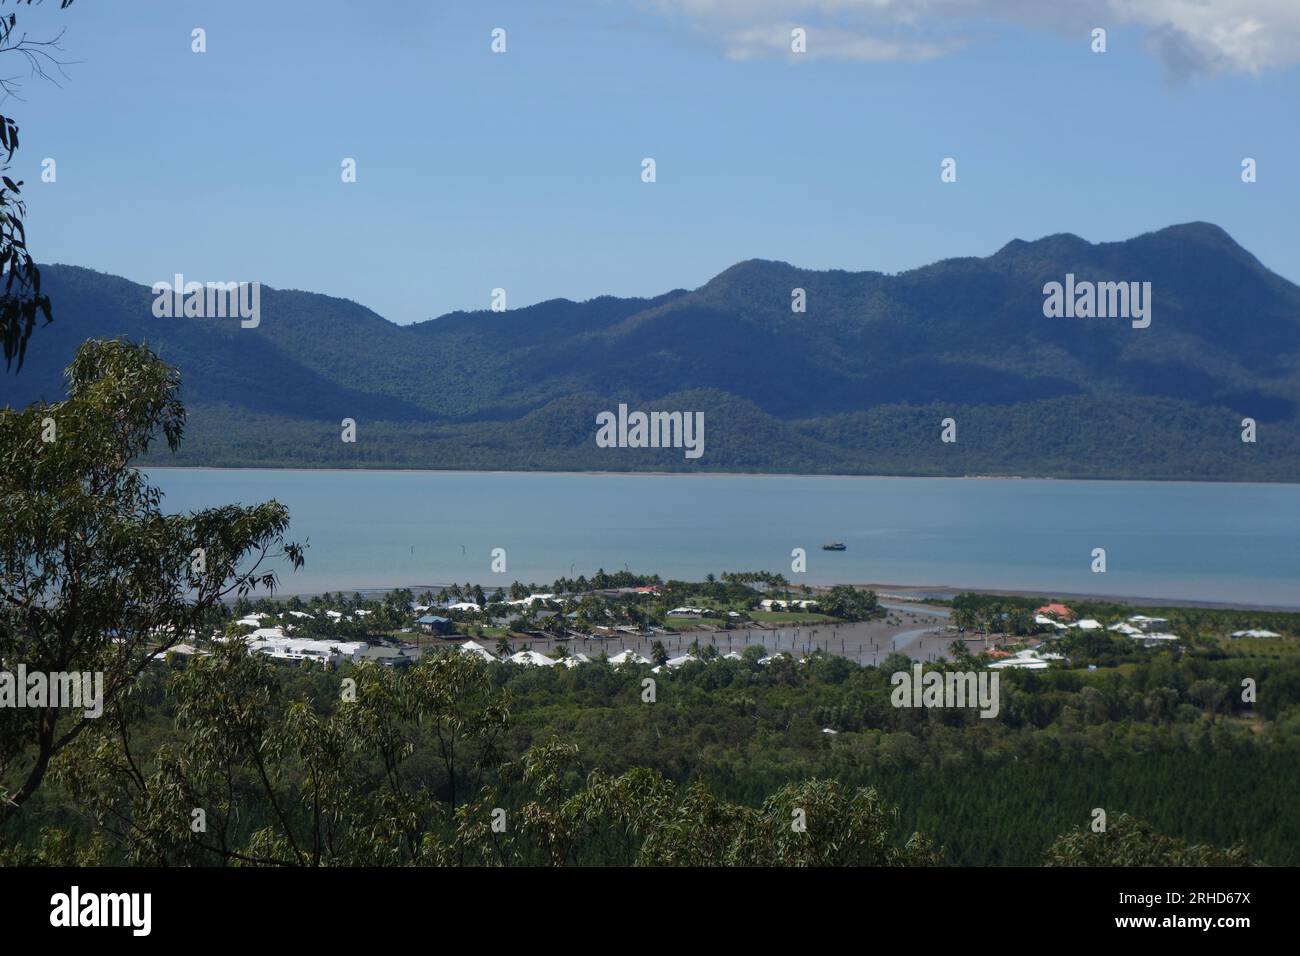 Disastrous Port Hinchinbrook development, viewed from Cardwell Forest Drive, with Hinchinbrook Island in the background, Queensland, Australia. No PR Stock Photo